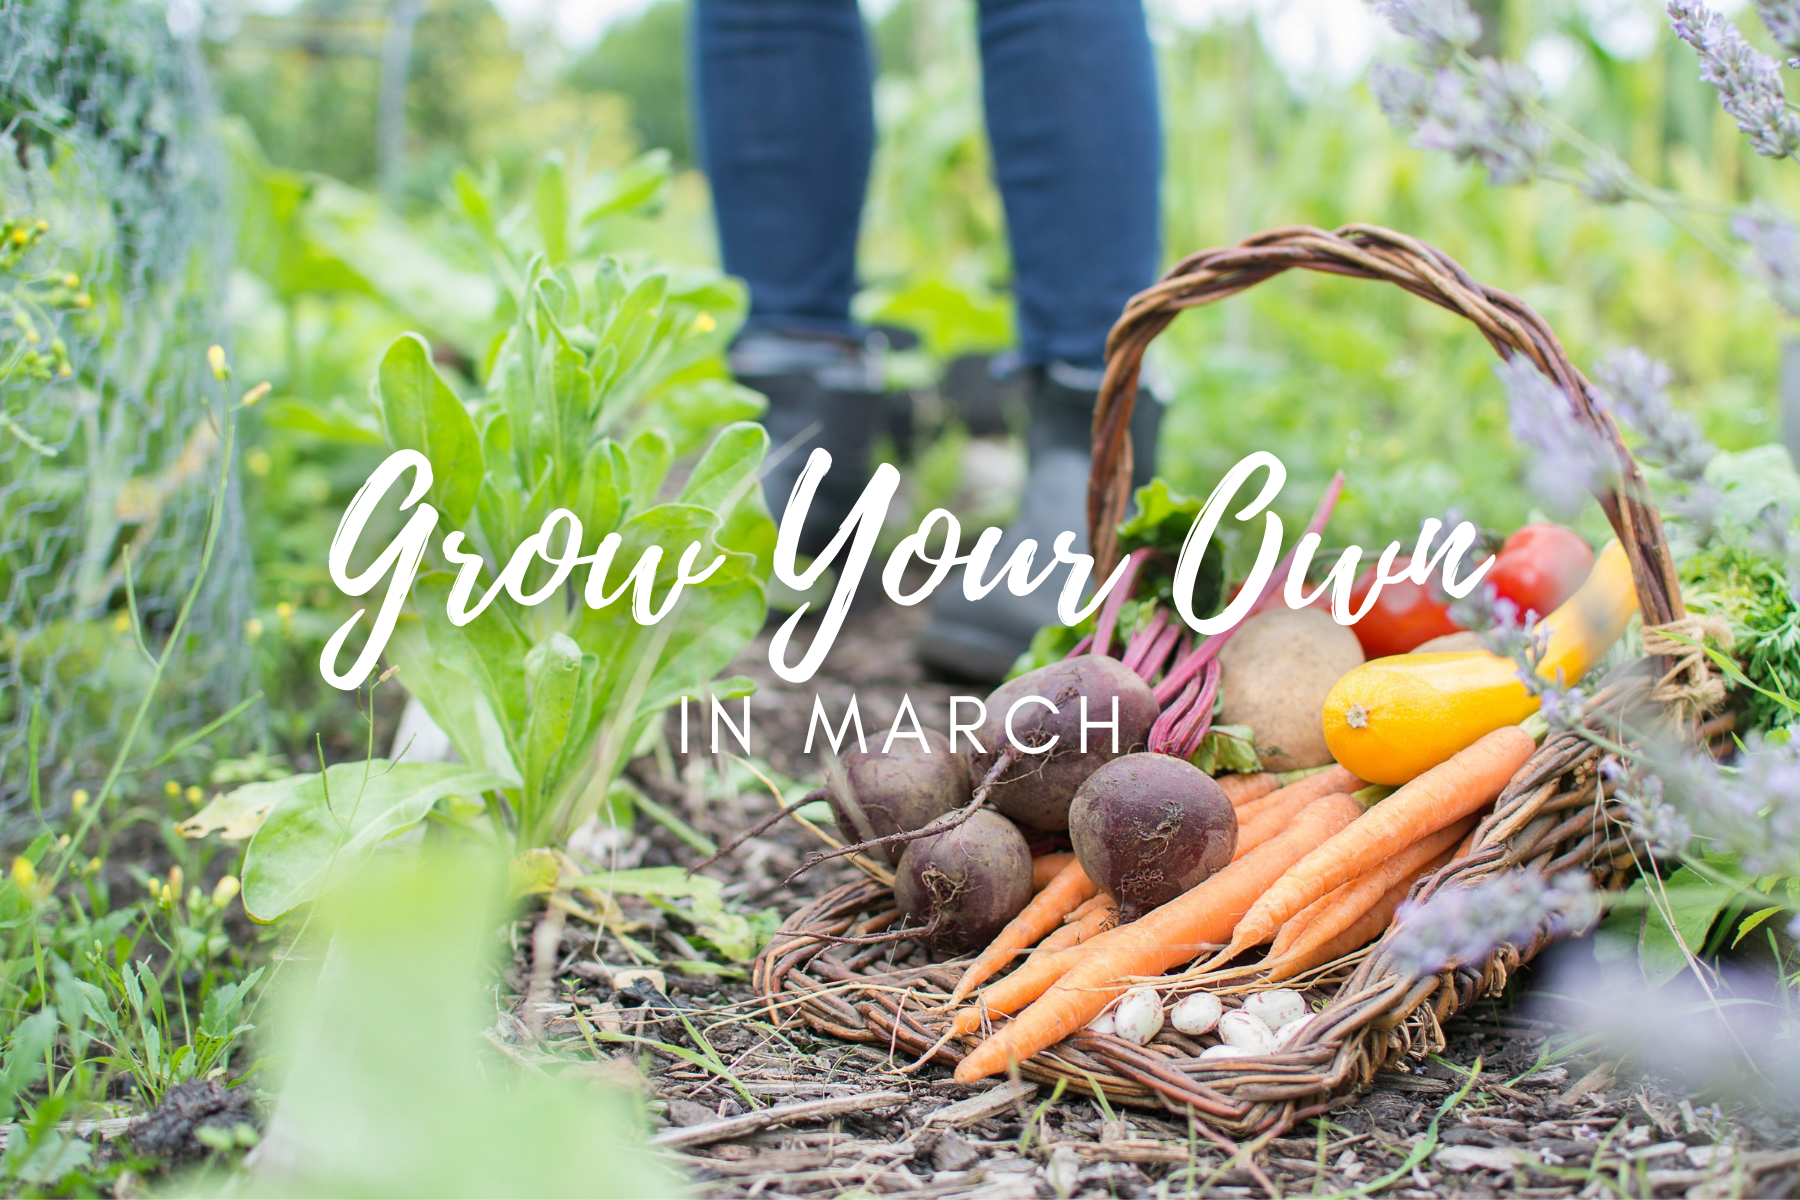 Grow Your Own In March